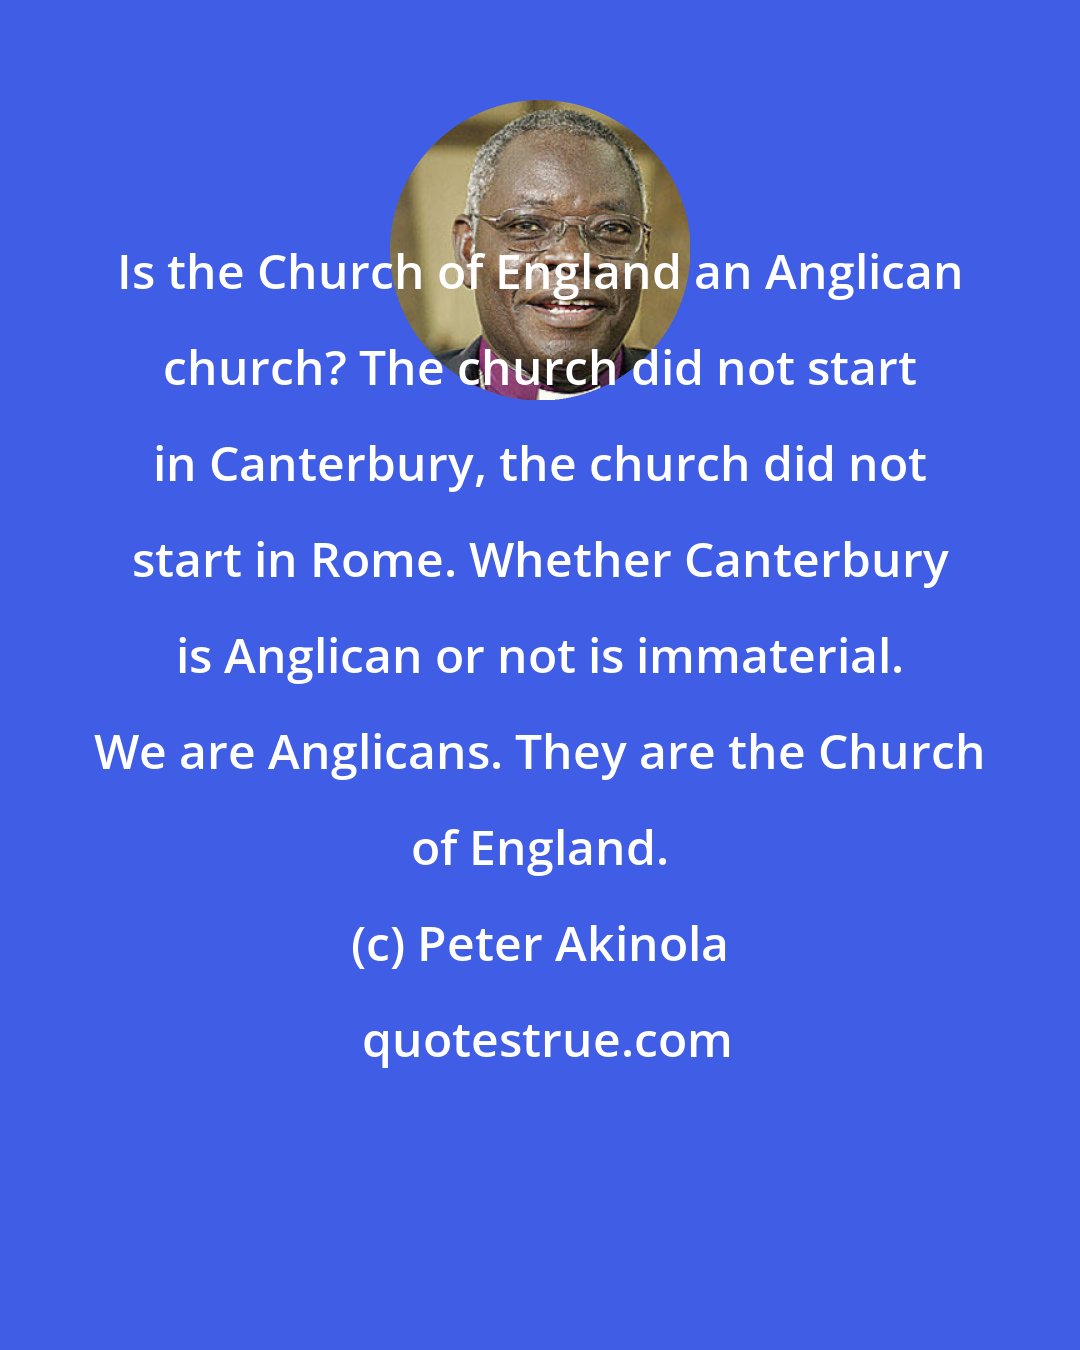 Peter Akinola: Is the Church of England an Anglican church? The church did not start in Canterbury, the church did not start in Rome. Whether Canterbury is Anglican or not is immaterial. We are Anglicans. They are the Church of England.